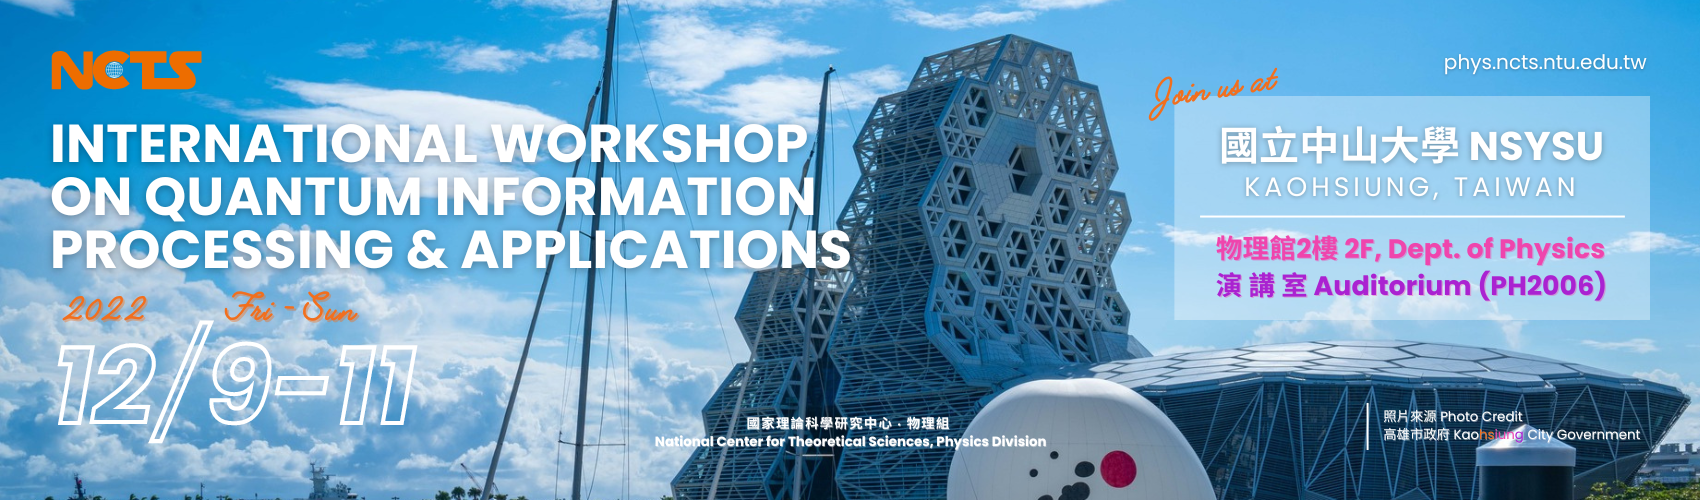 International Workshop on Quantum Information Processing and Applications 2022